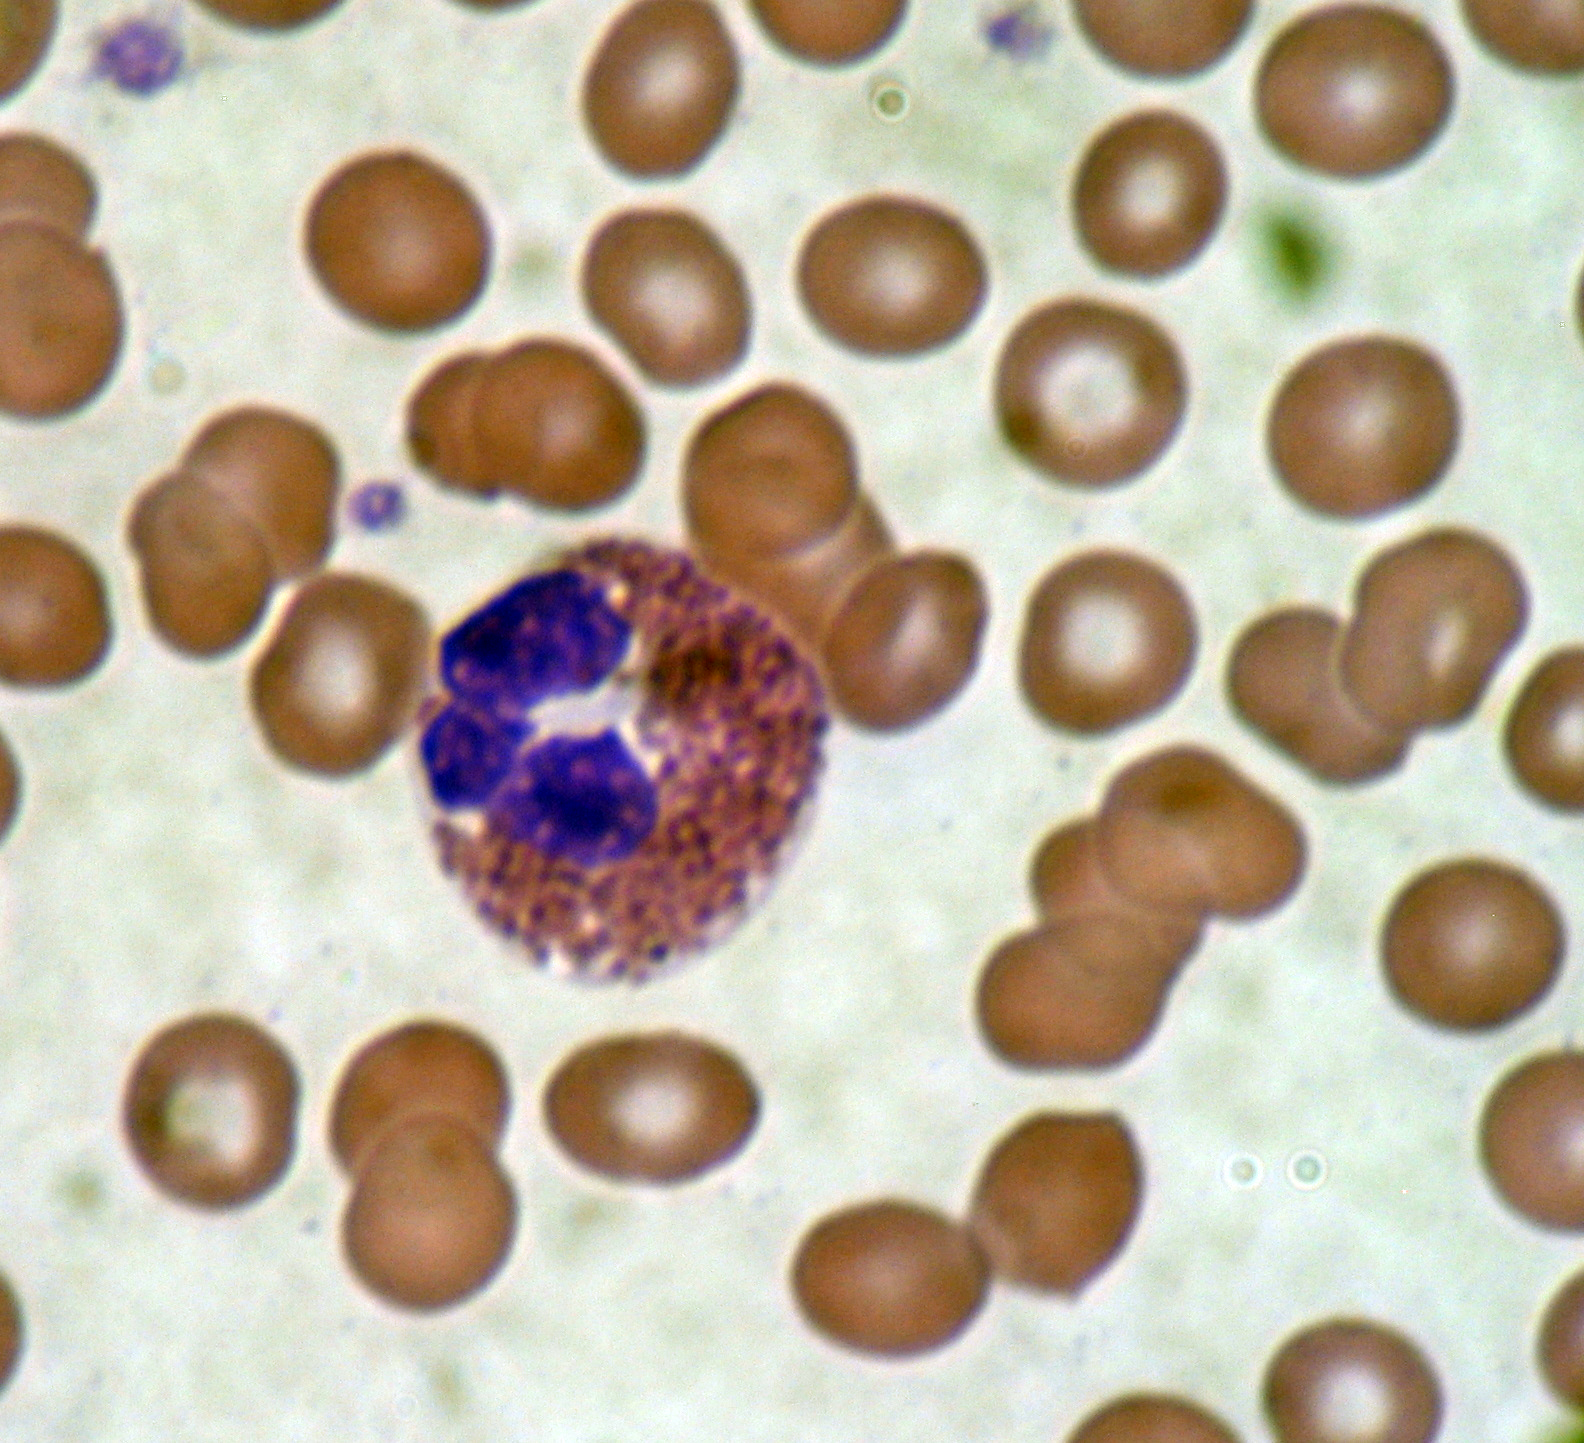 An eosinophil. Red blood cells surround the eosinophil, two platelets at the top left corner.